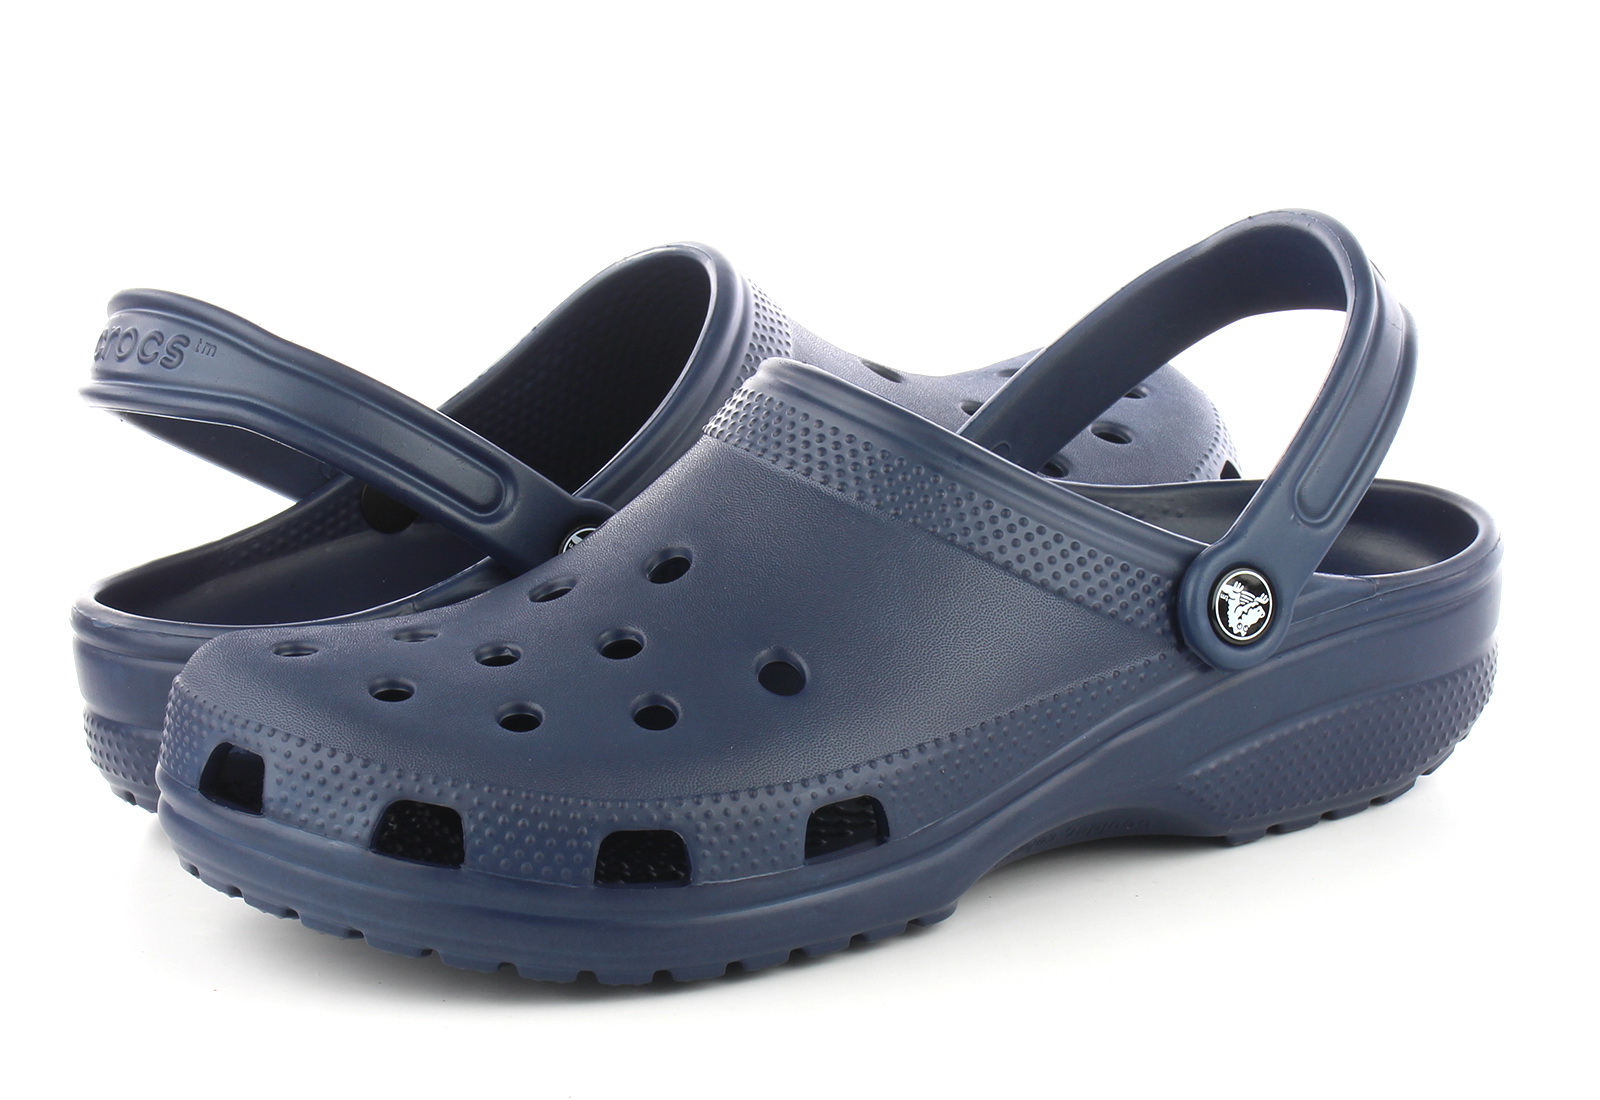 Crocs Clogs - Classic - 10001-410 - Online shop for sneakers, shoes and  boots